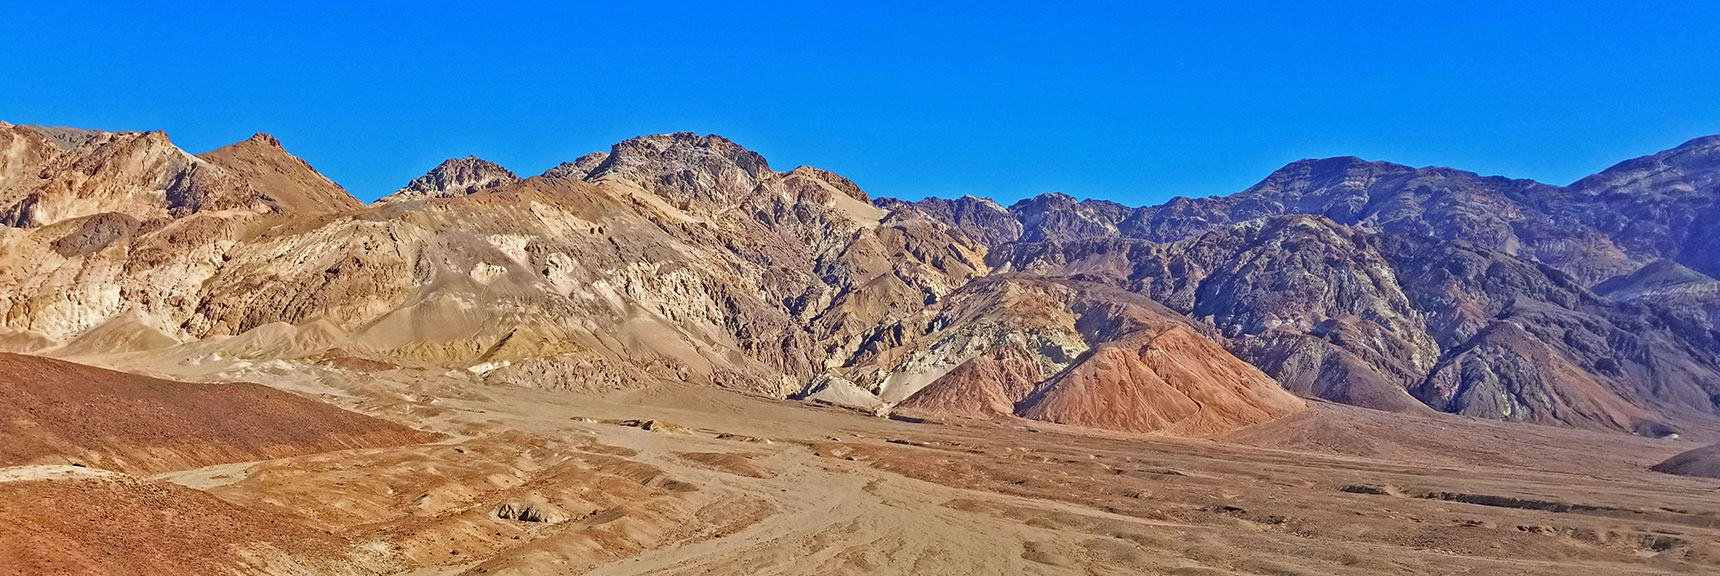 Black Mountains and Colorful Hills Viewed from Artist Drive Ridge Hike | Artists Drive Hidden Canyon Hikes | Death Valley National Park, California